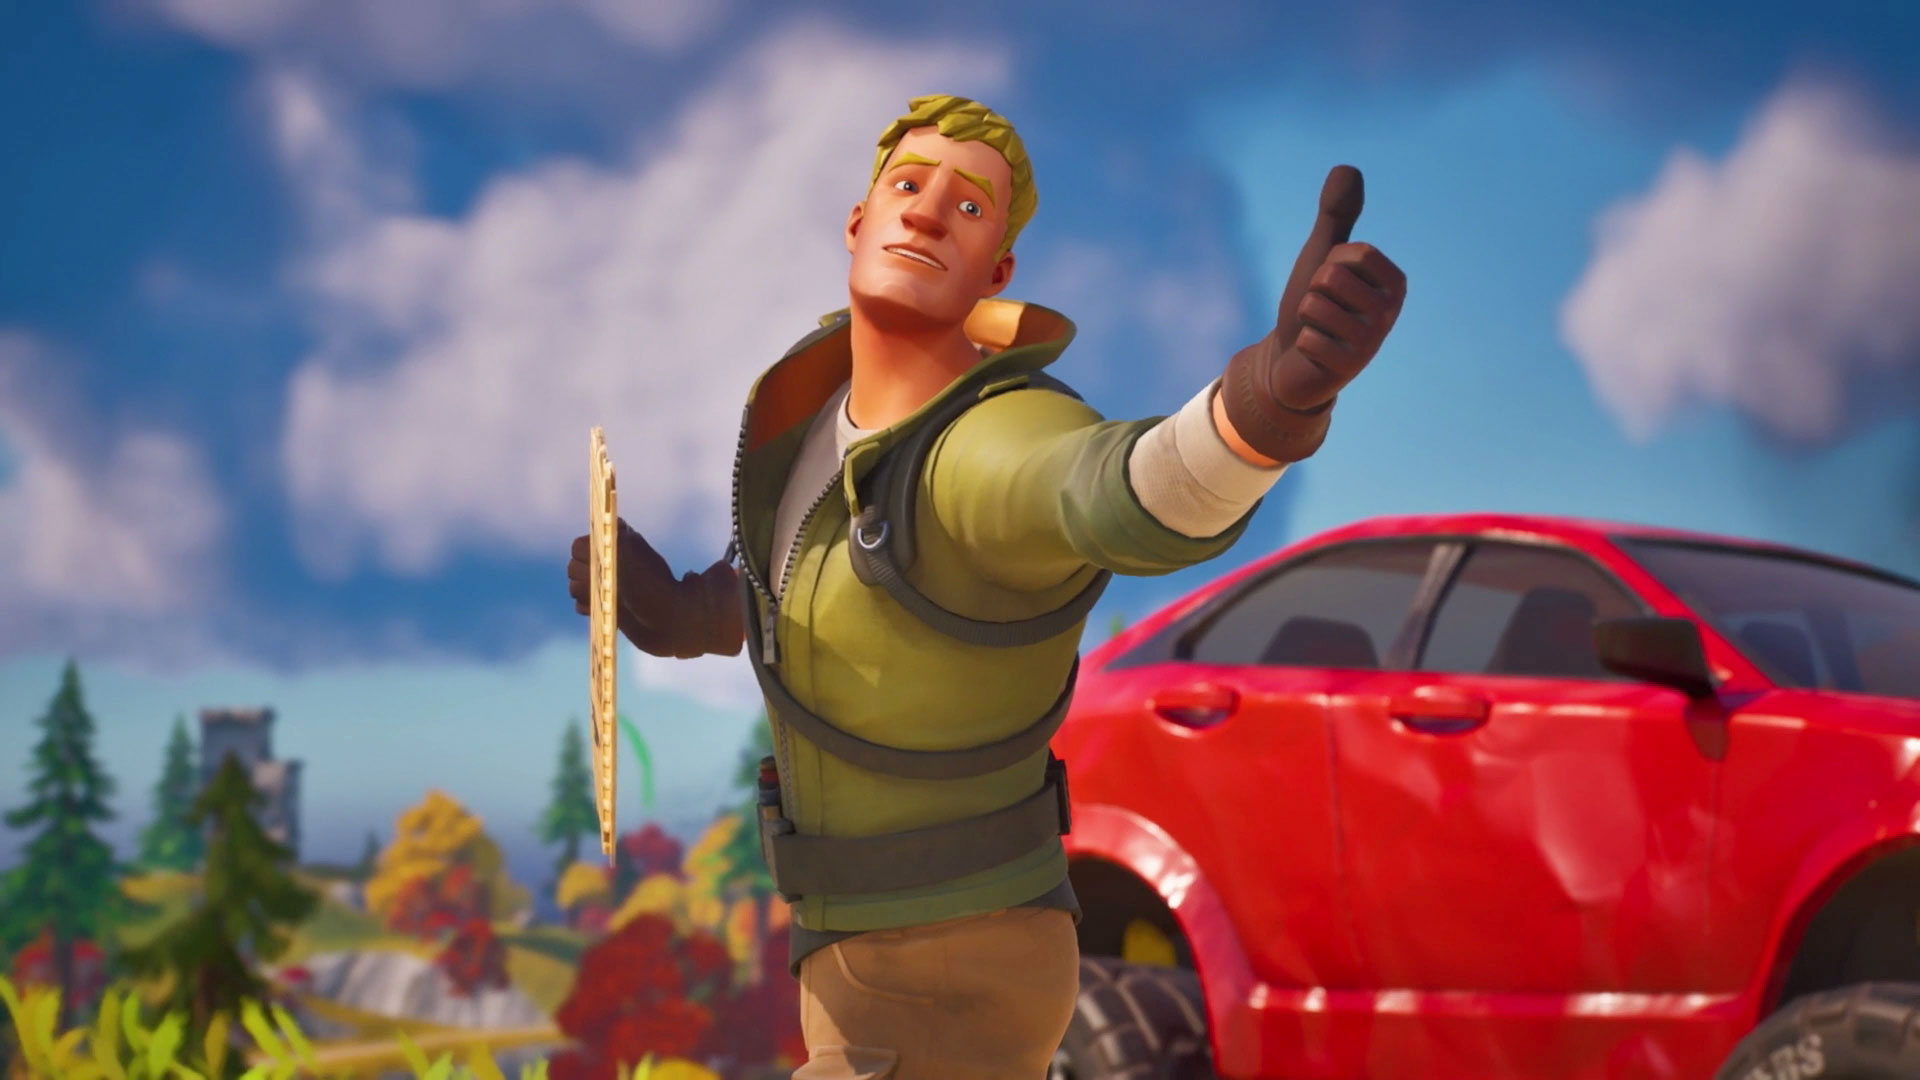 When does Fortnite Season 2 start? Here’s everything we know so far